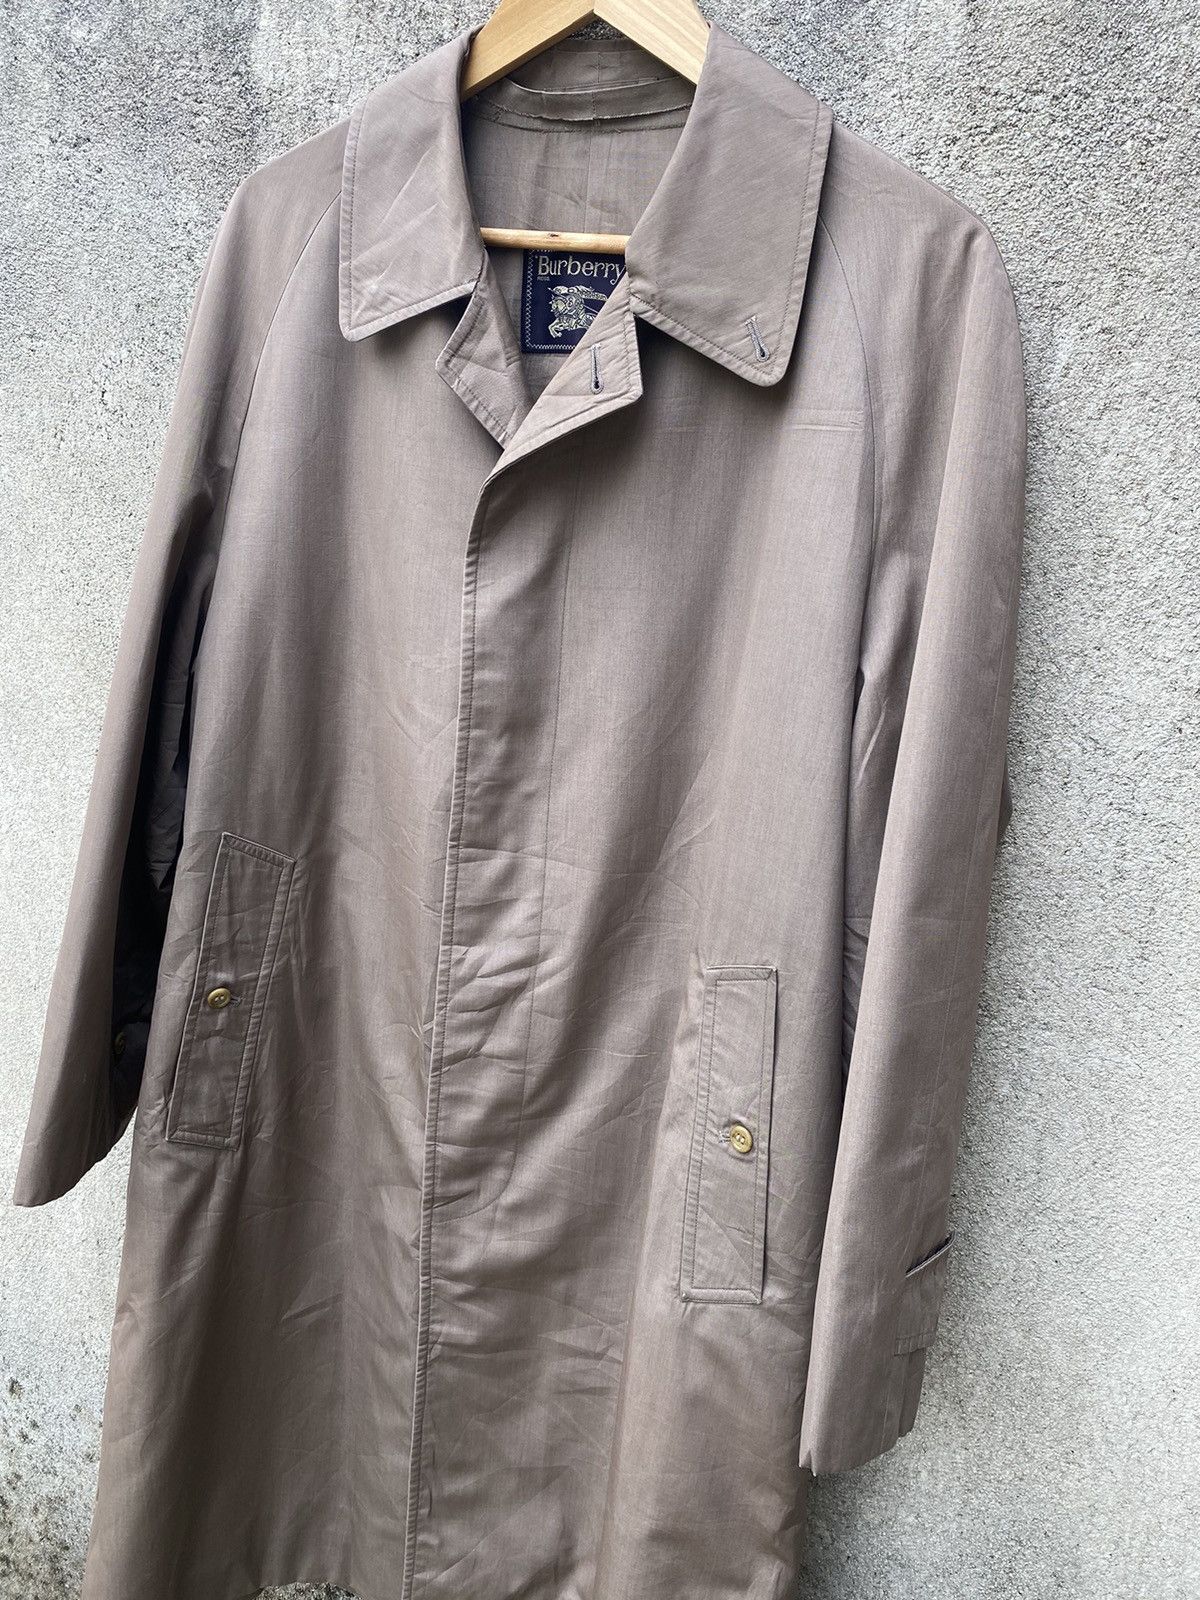 Burberry Trench Coat Single Breasted Jacket - 5